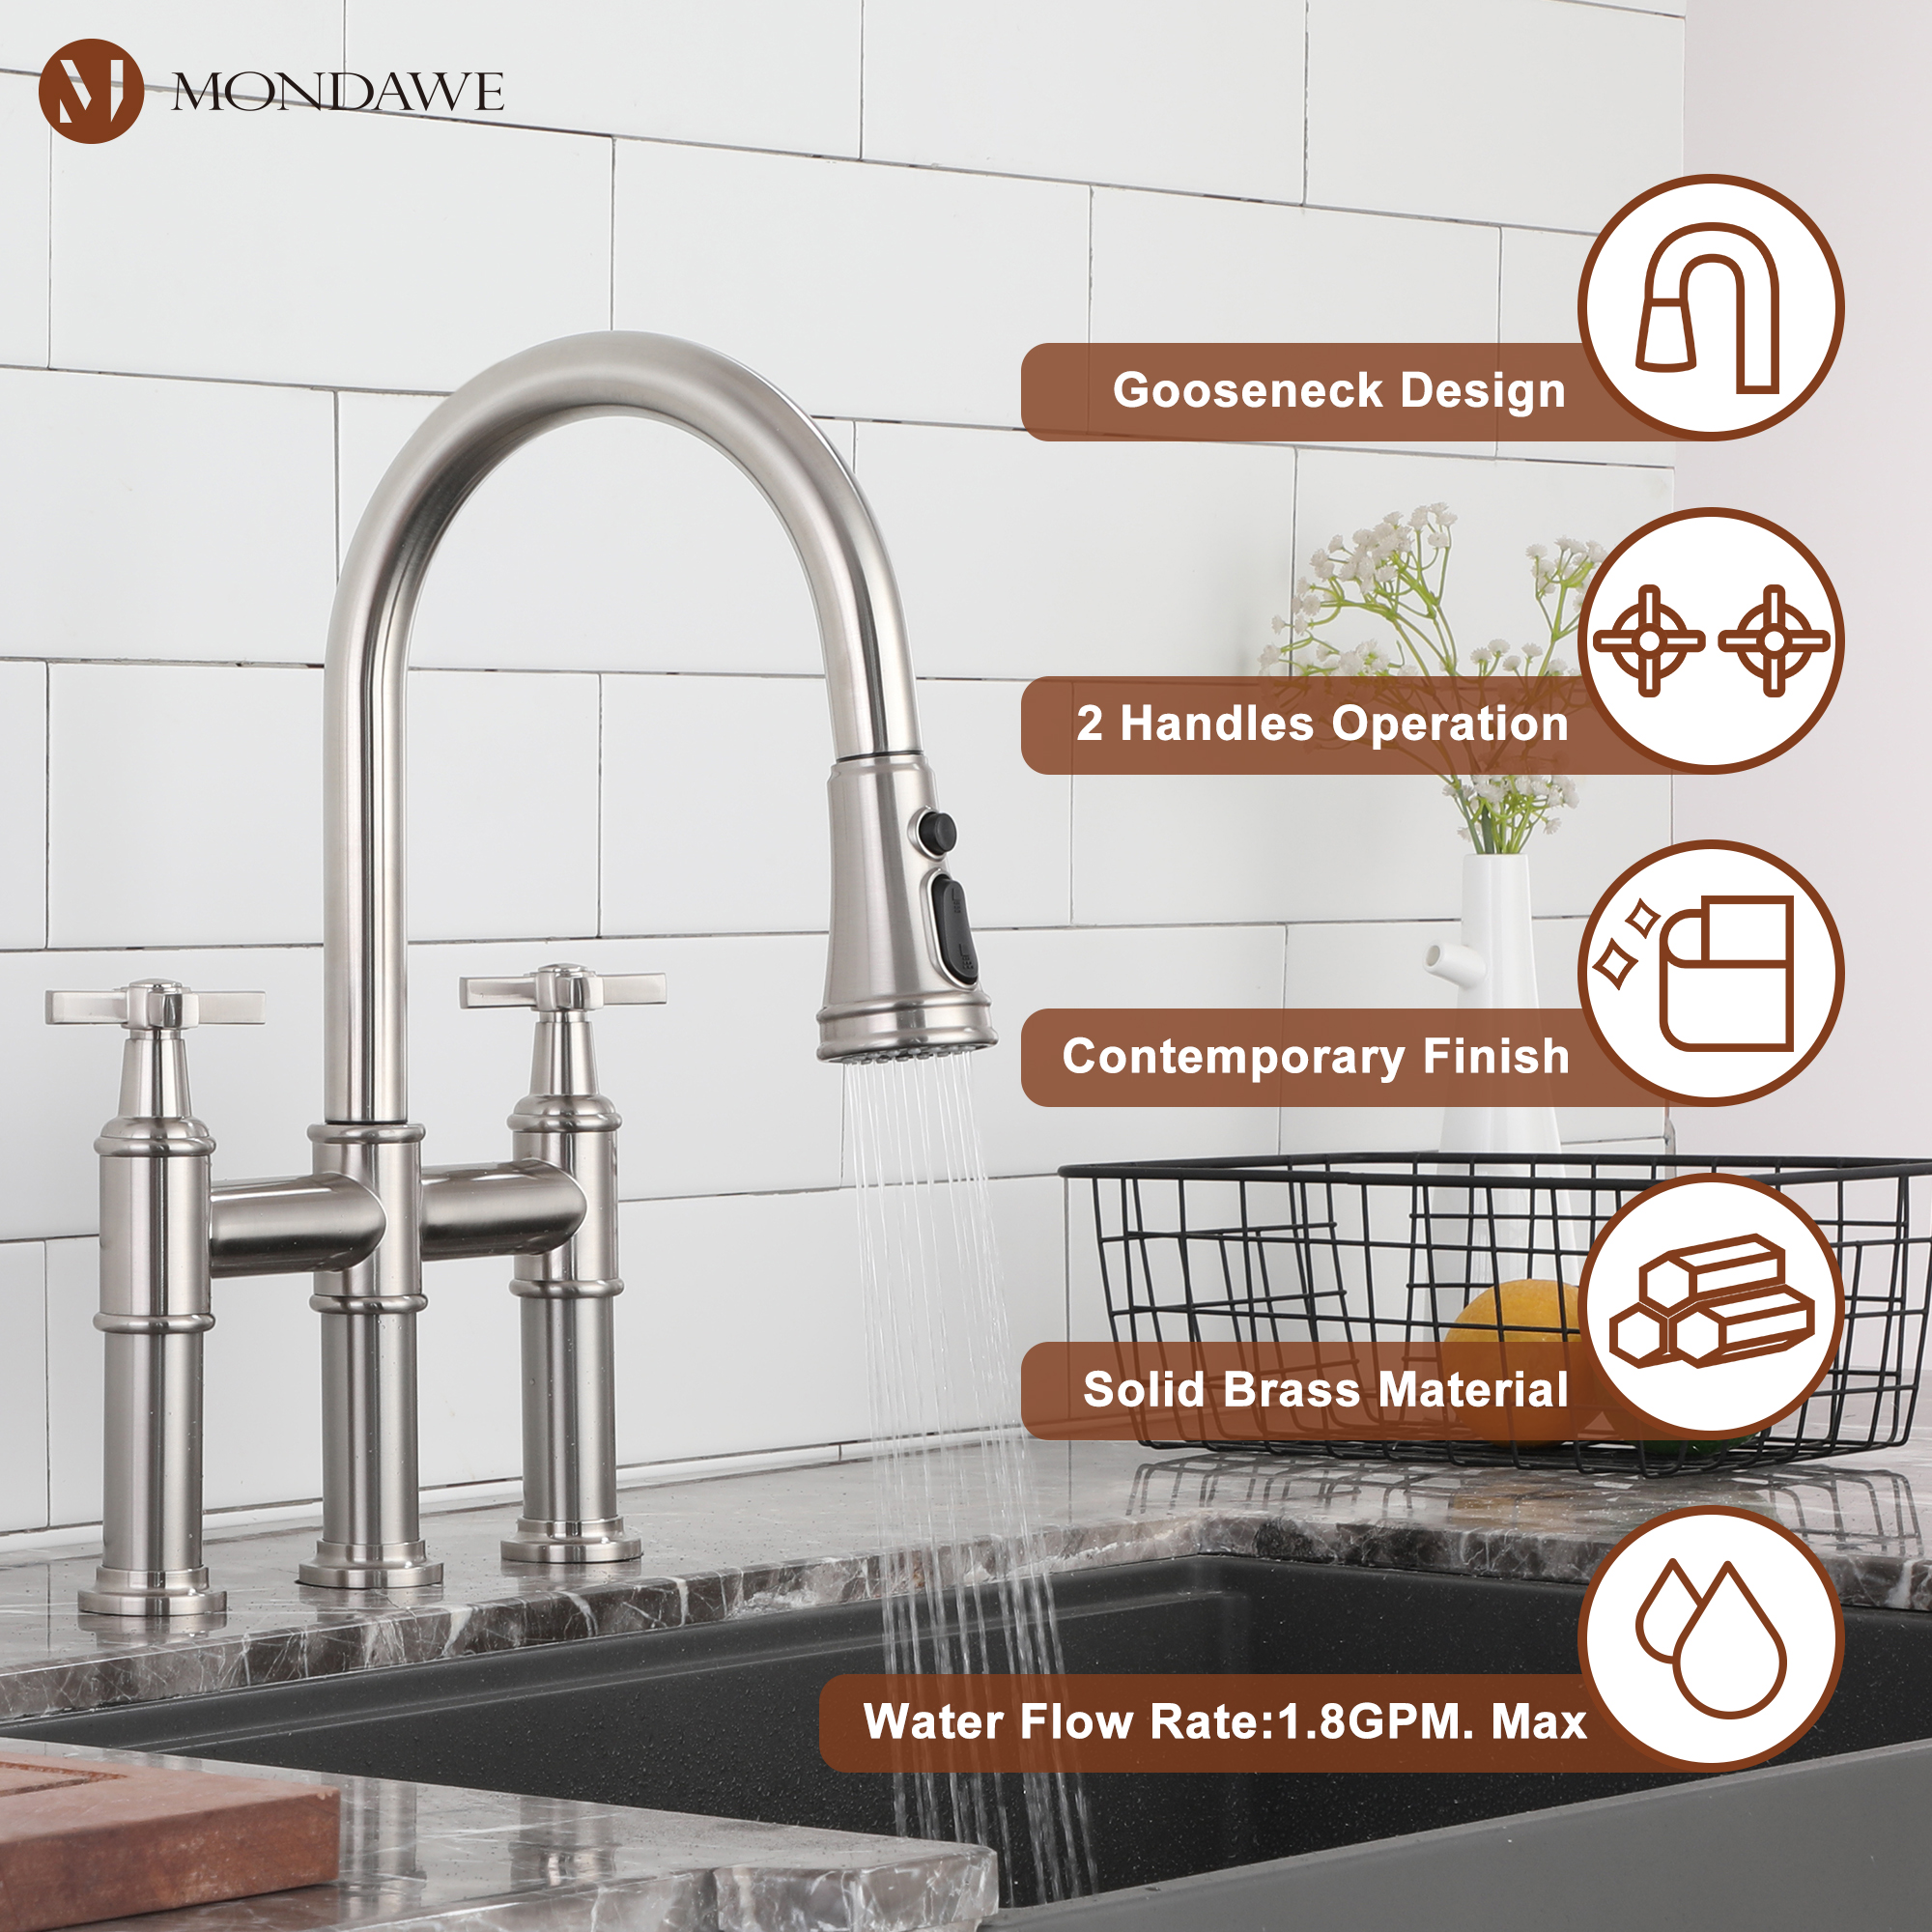 Bridge Kitchen Faucet with 3 Way Spray Function